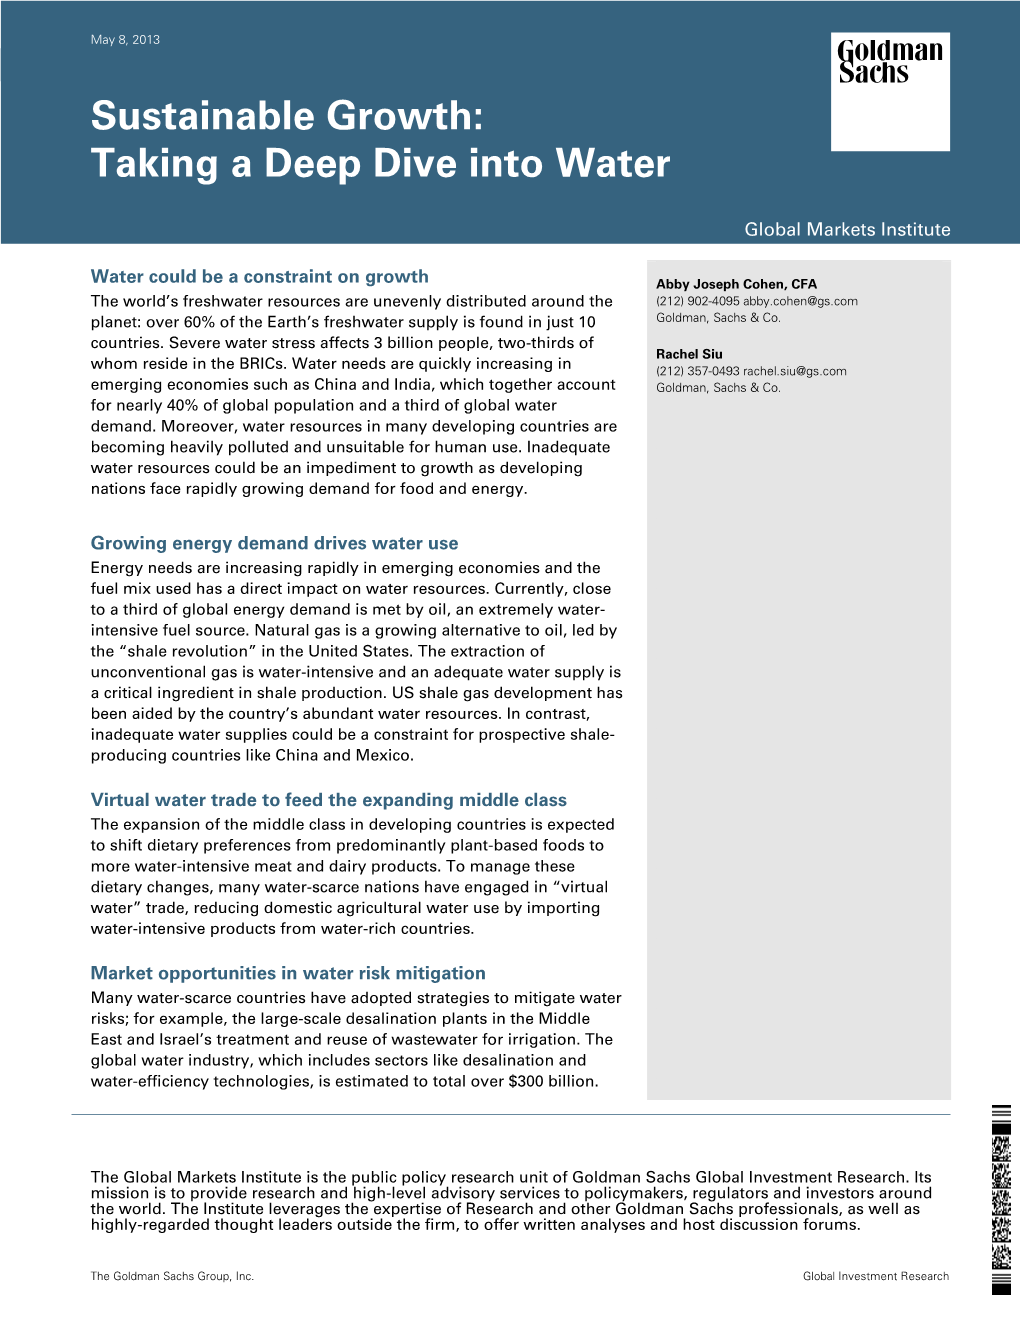 Sustainable Growth: Taking a Deep Dive Into Water